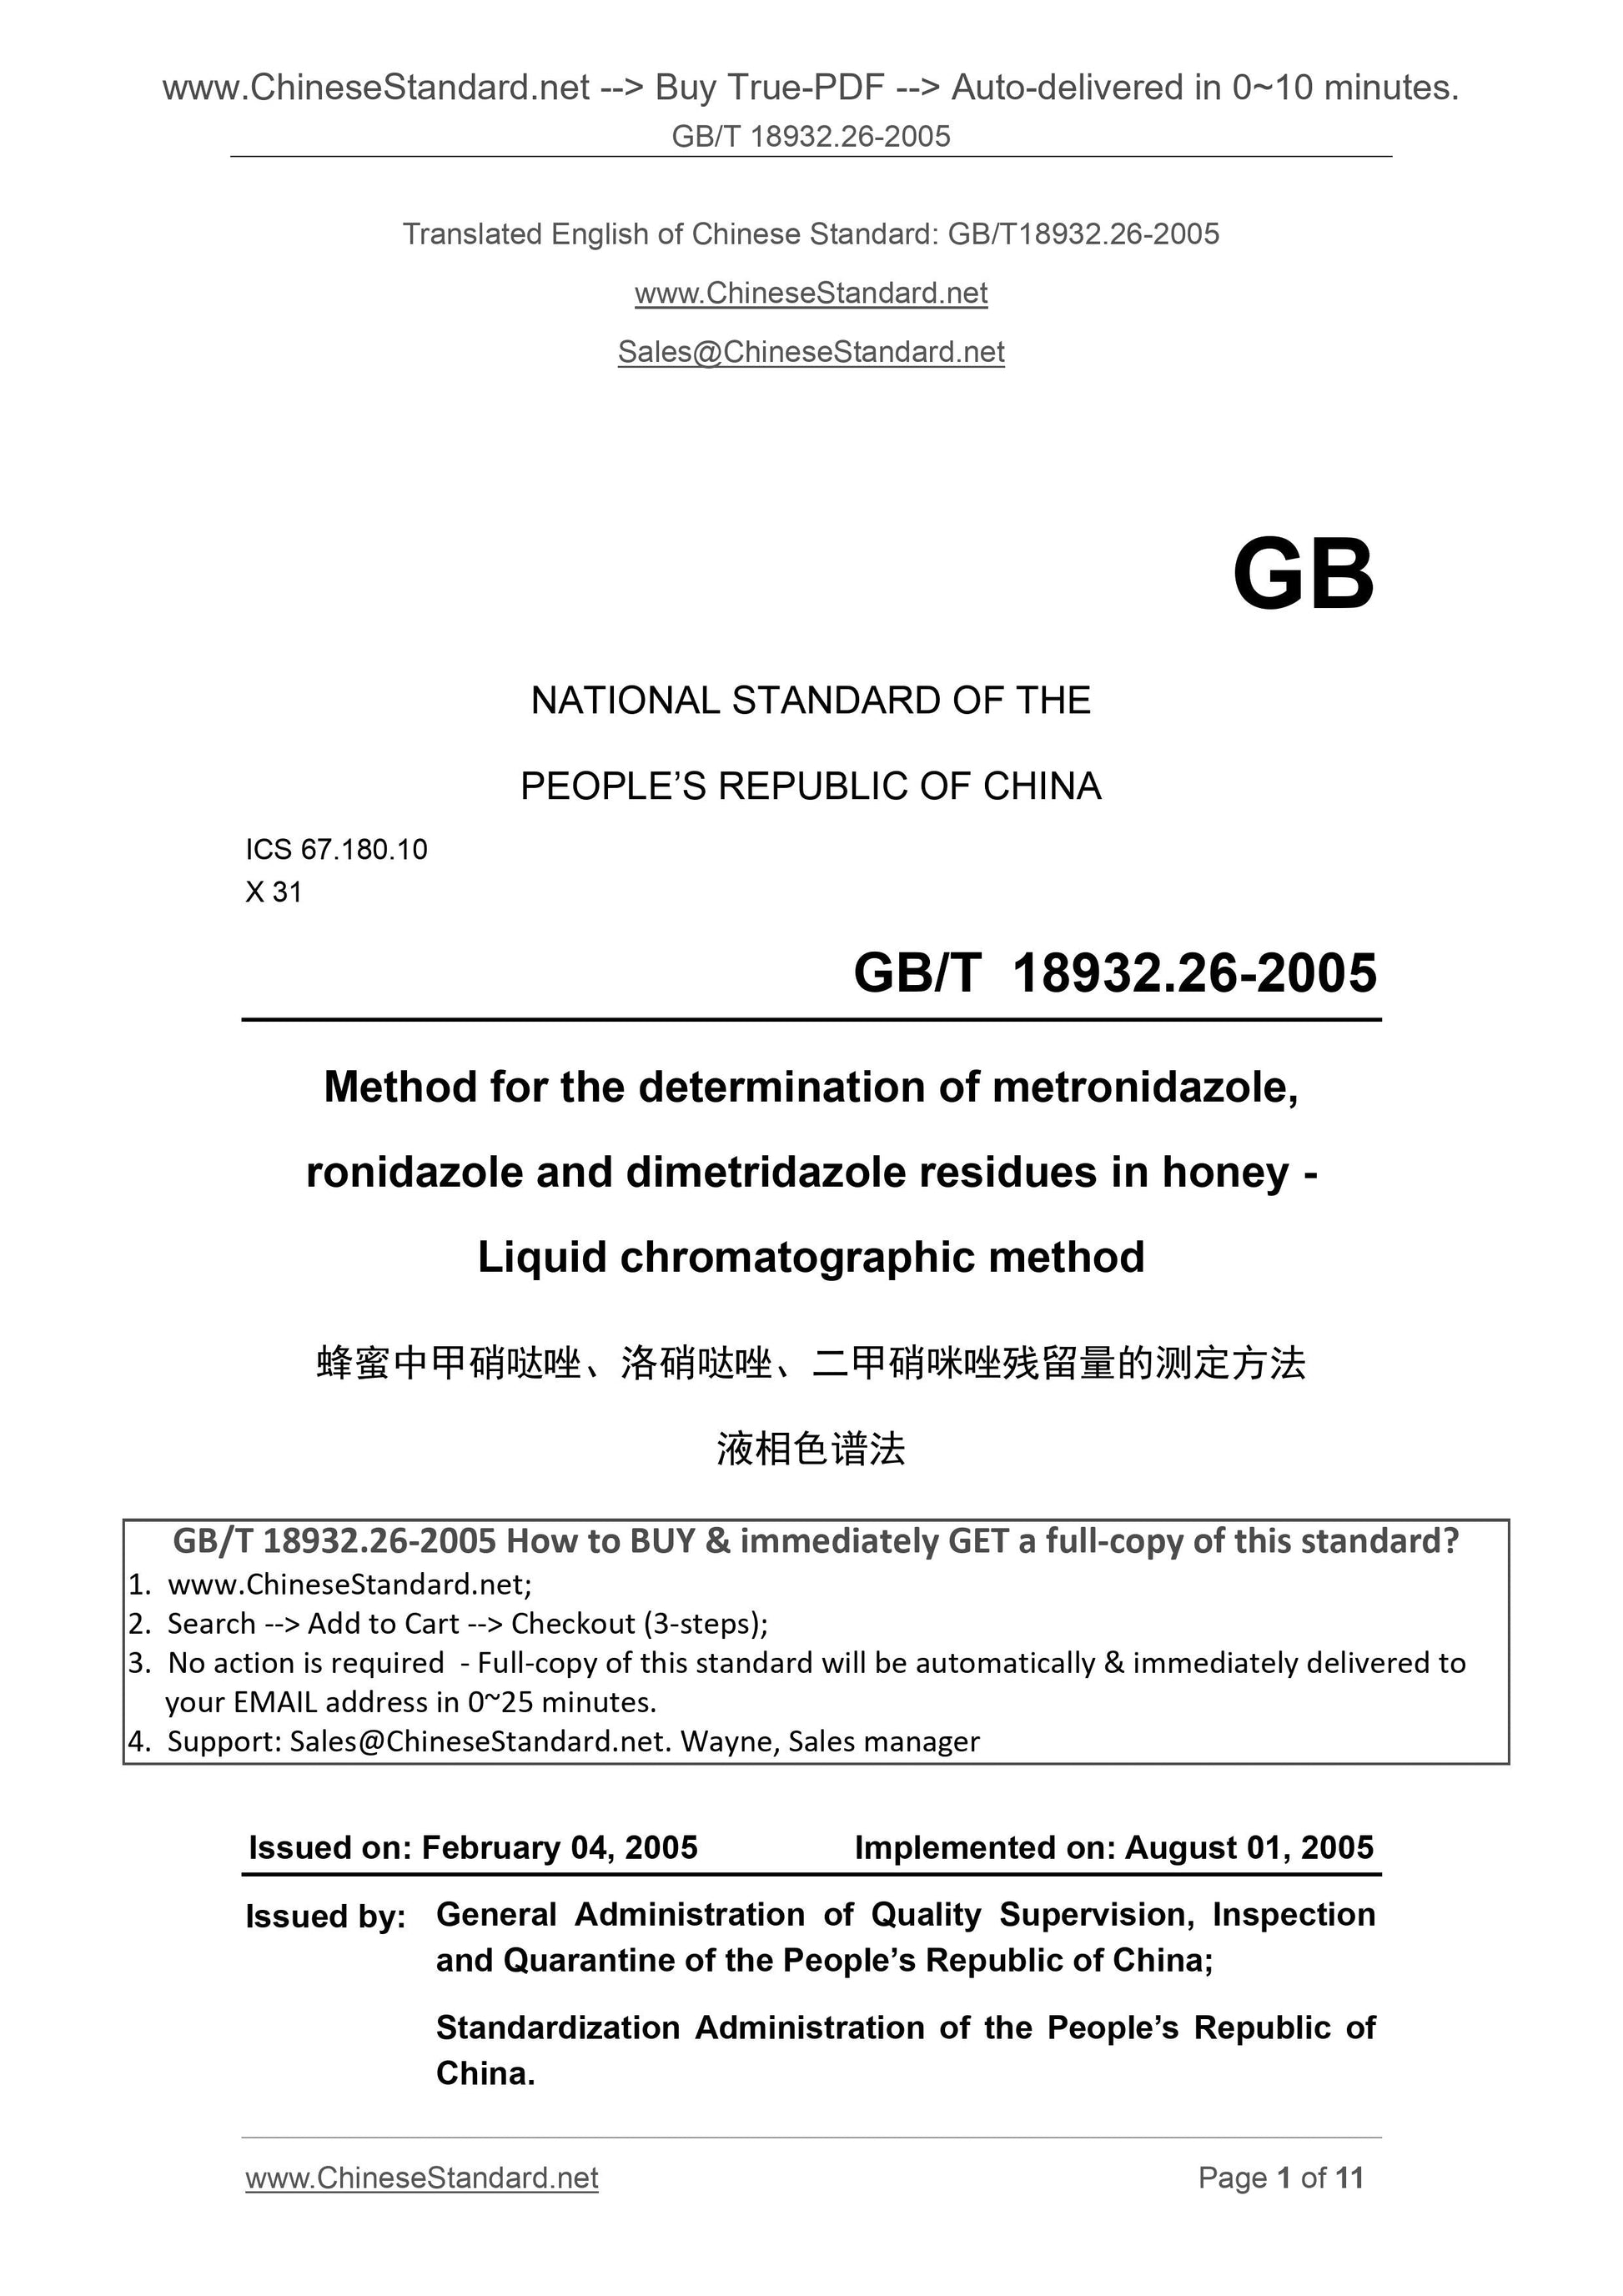 GB/T 18932.26-2005 Page 1